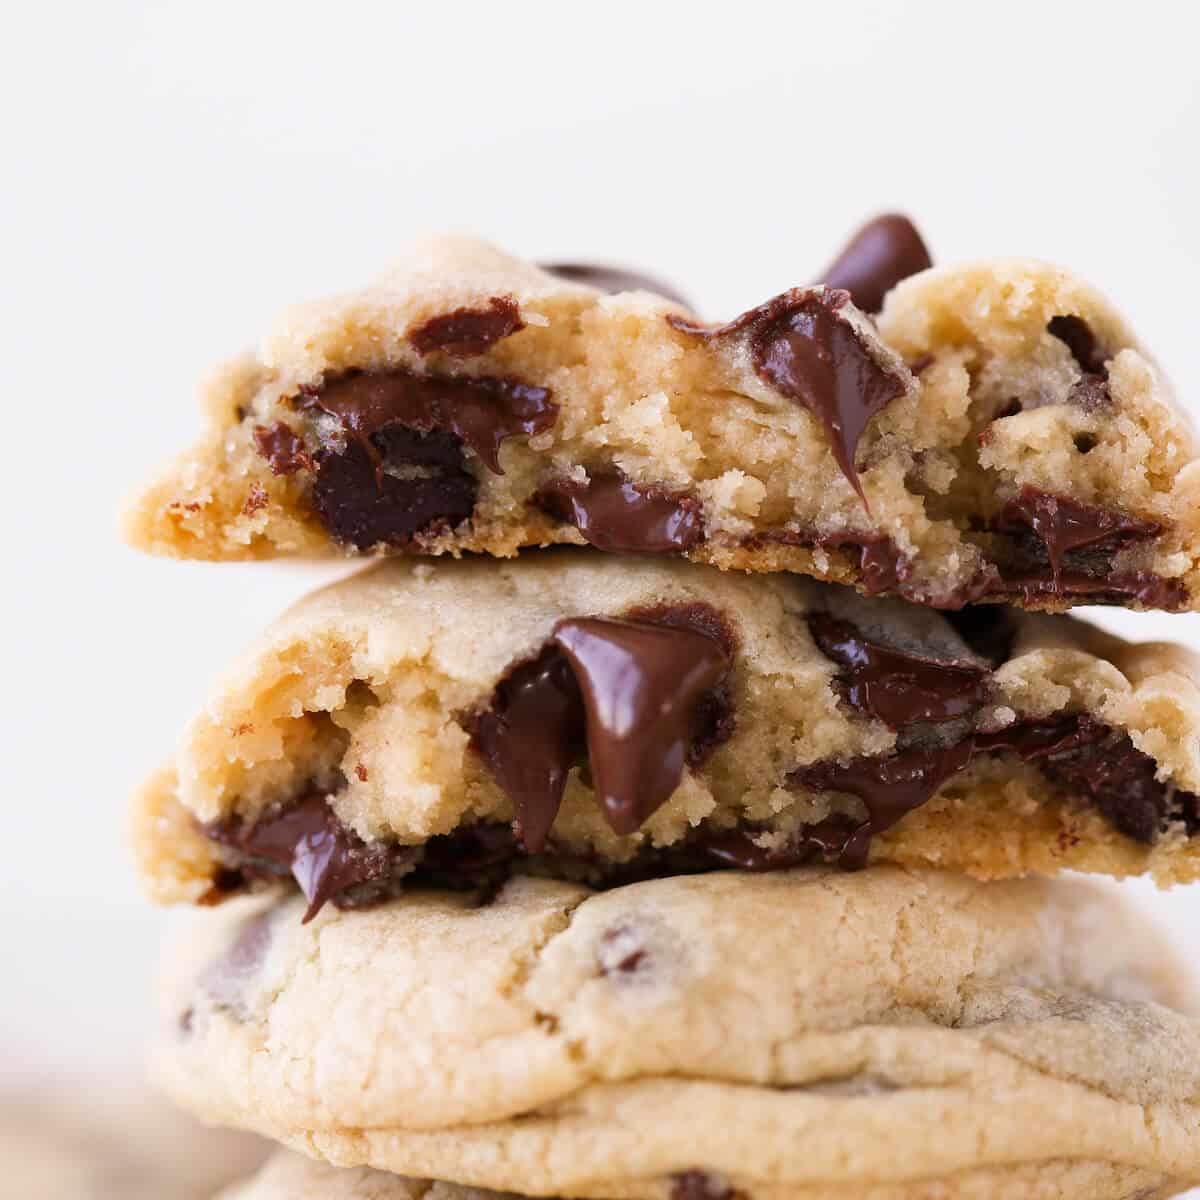 Two chocolate chip cookies stacked with gooey chocolate chips.